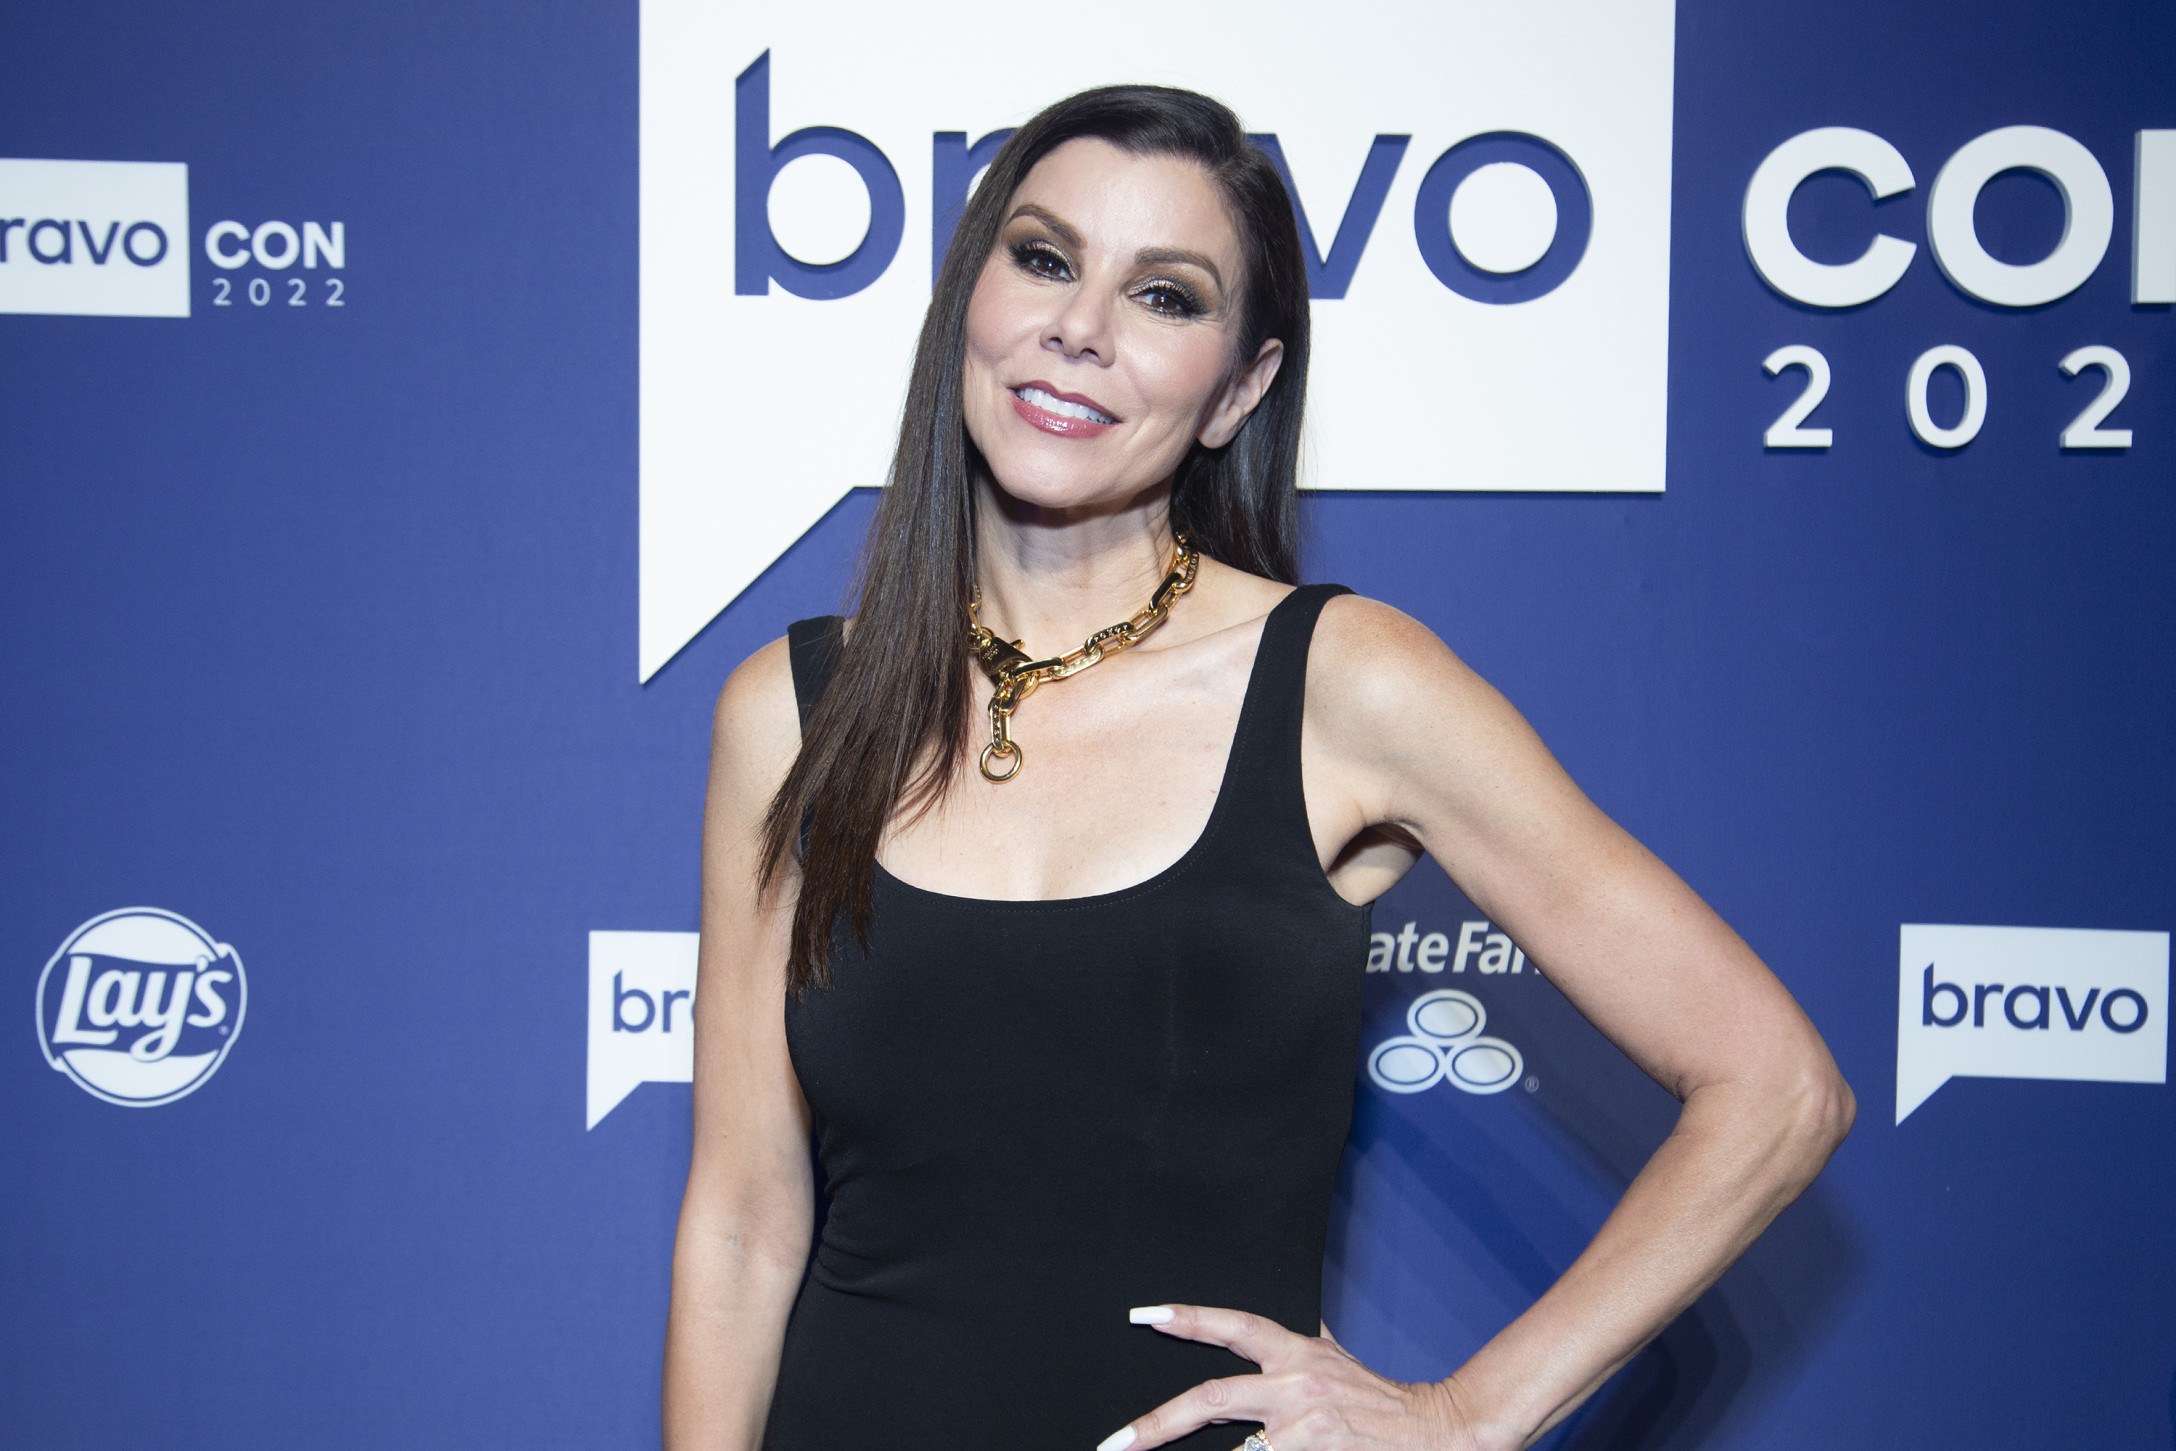 Real Housewives Star Heather Dubrows 12-Year-Old Child Comes Out as Transgender